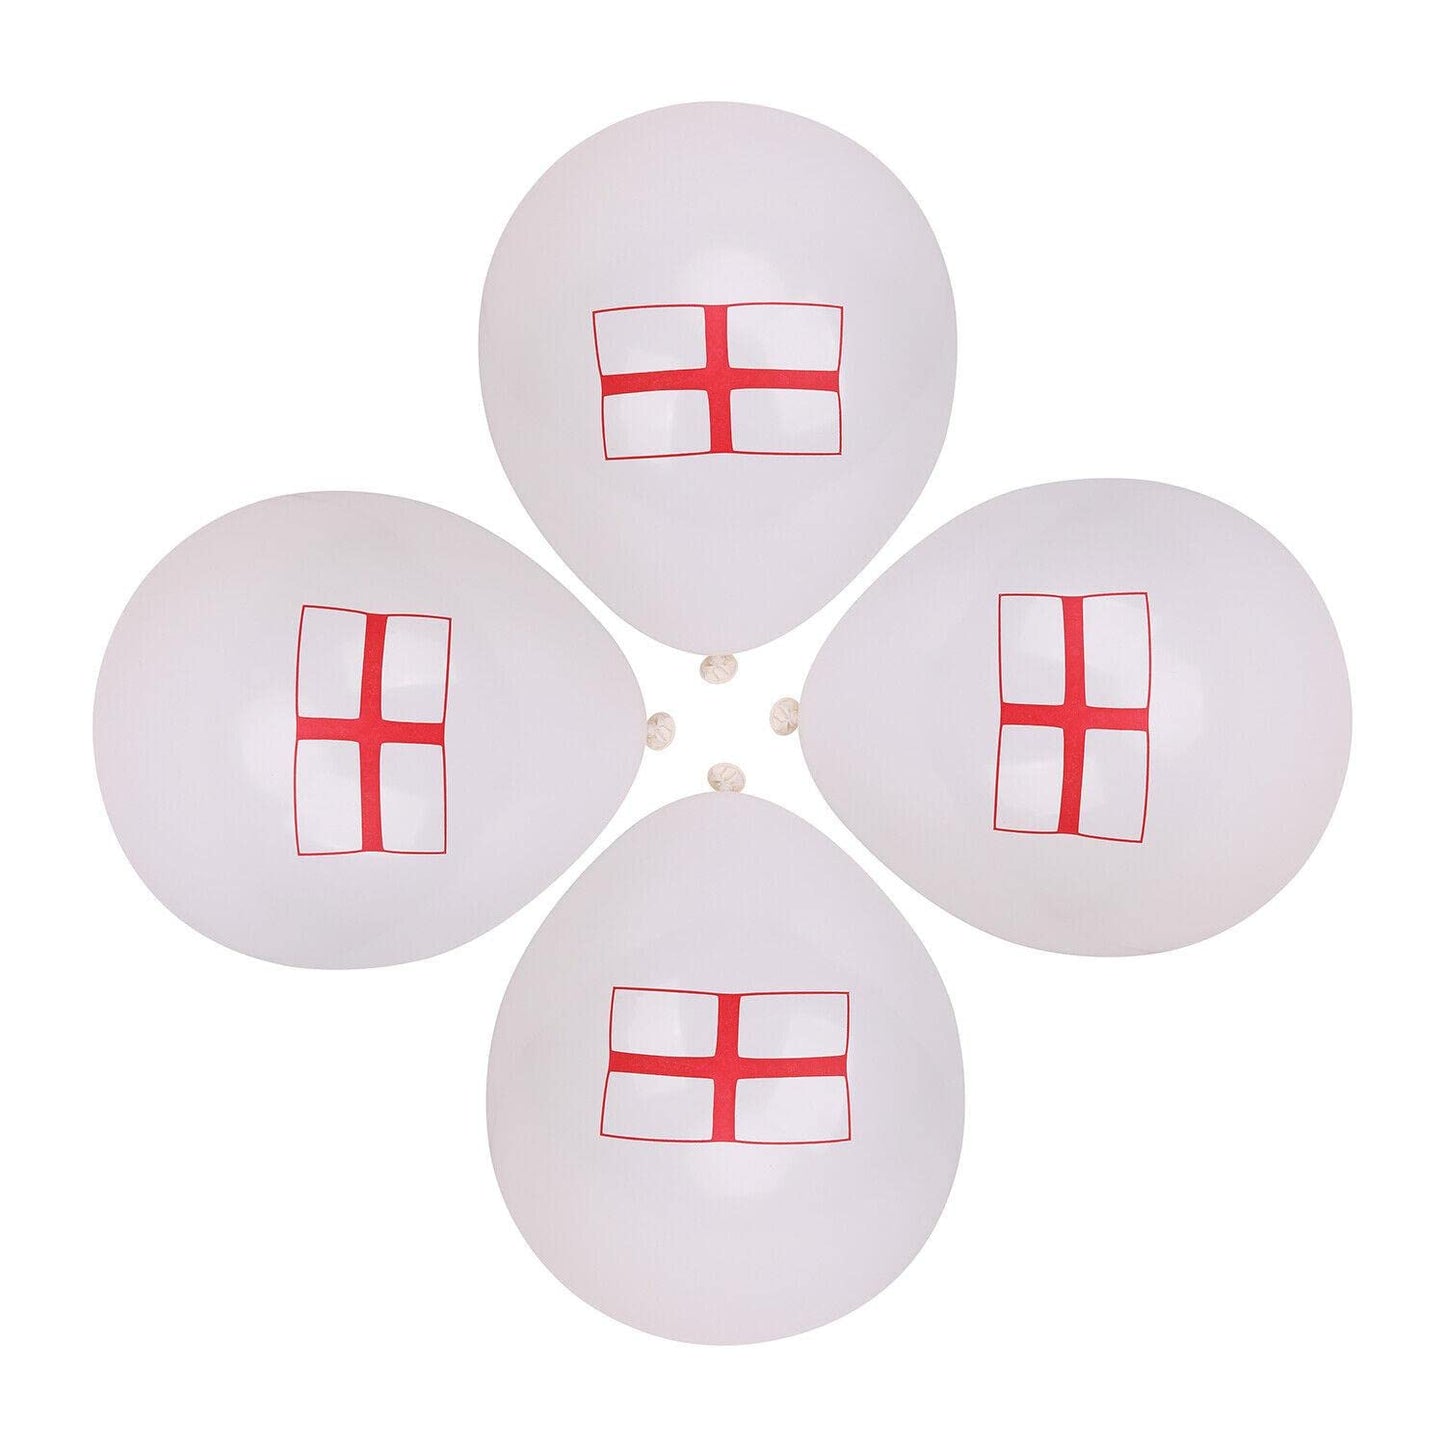 15X Latex Balloons England St George Flag Printed Football World Cup Party Decor